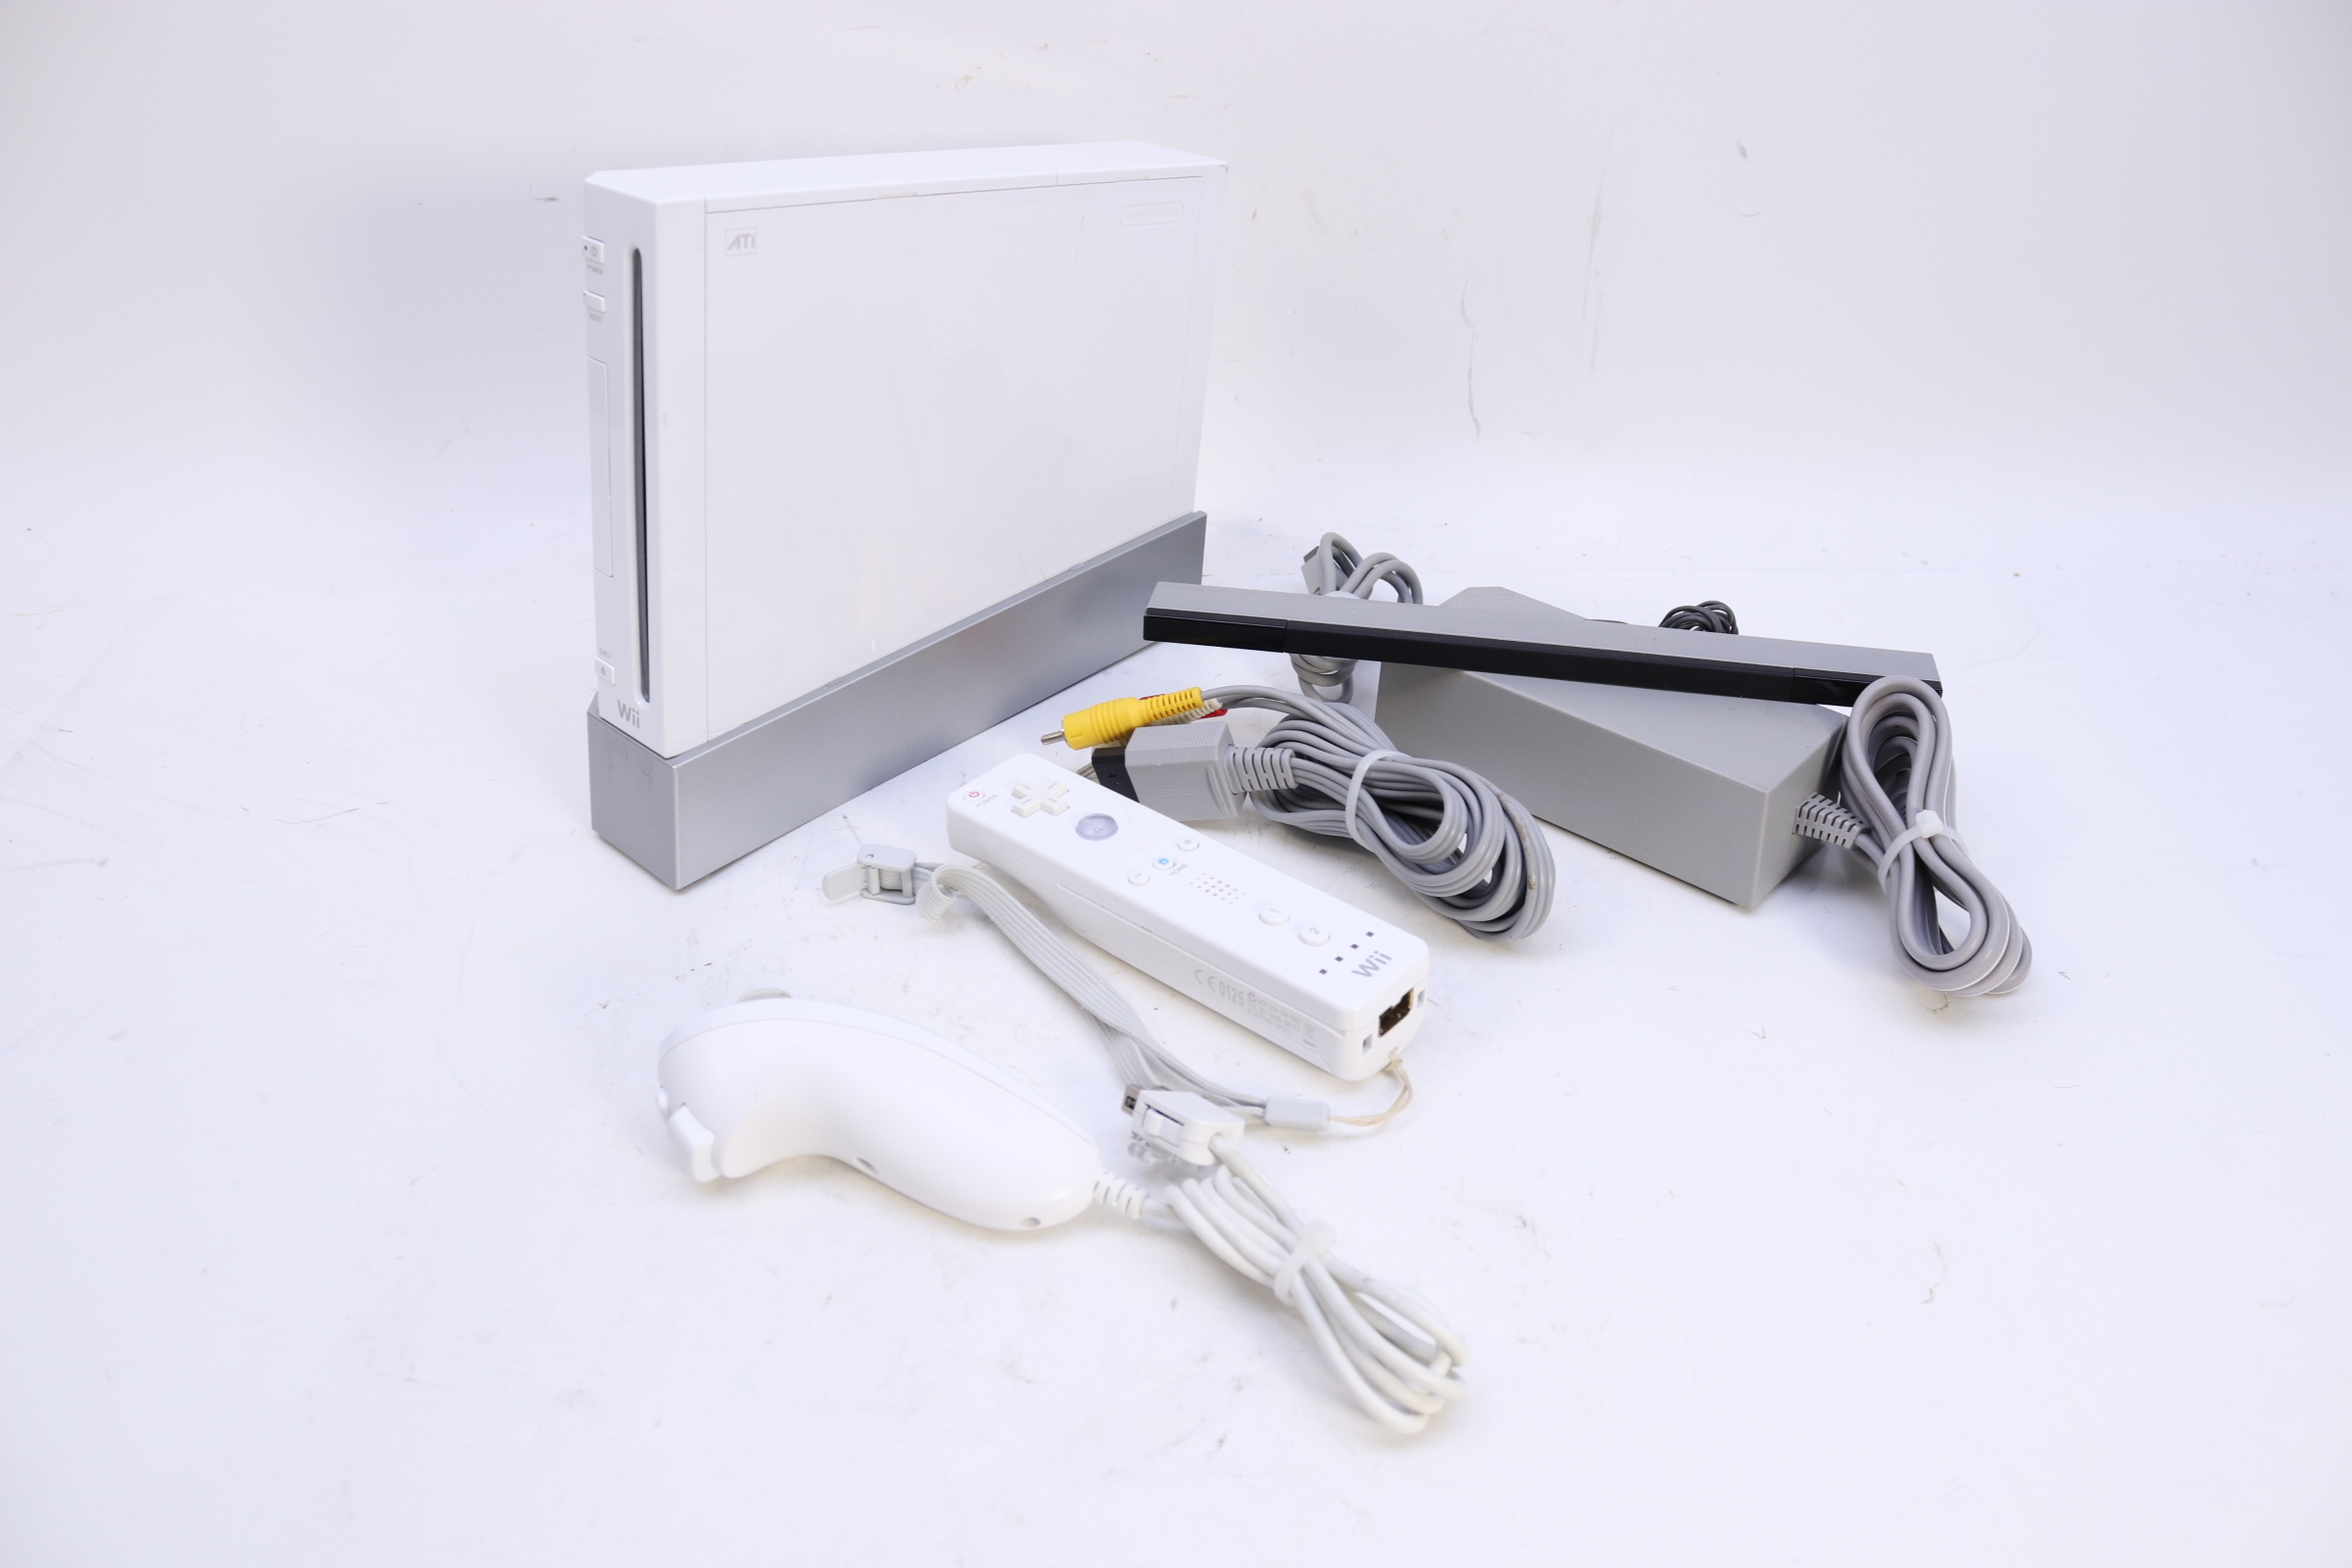 cache Achievement too much Nintendo Wii RVL-001 512MB White Body Home Video Gaming Console - 5612